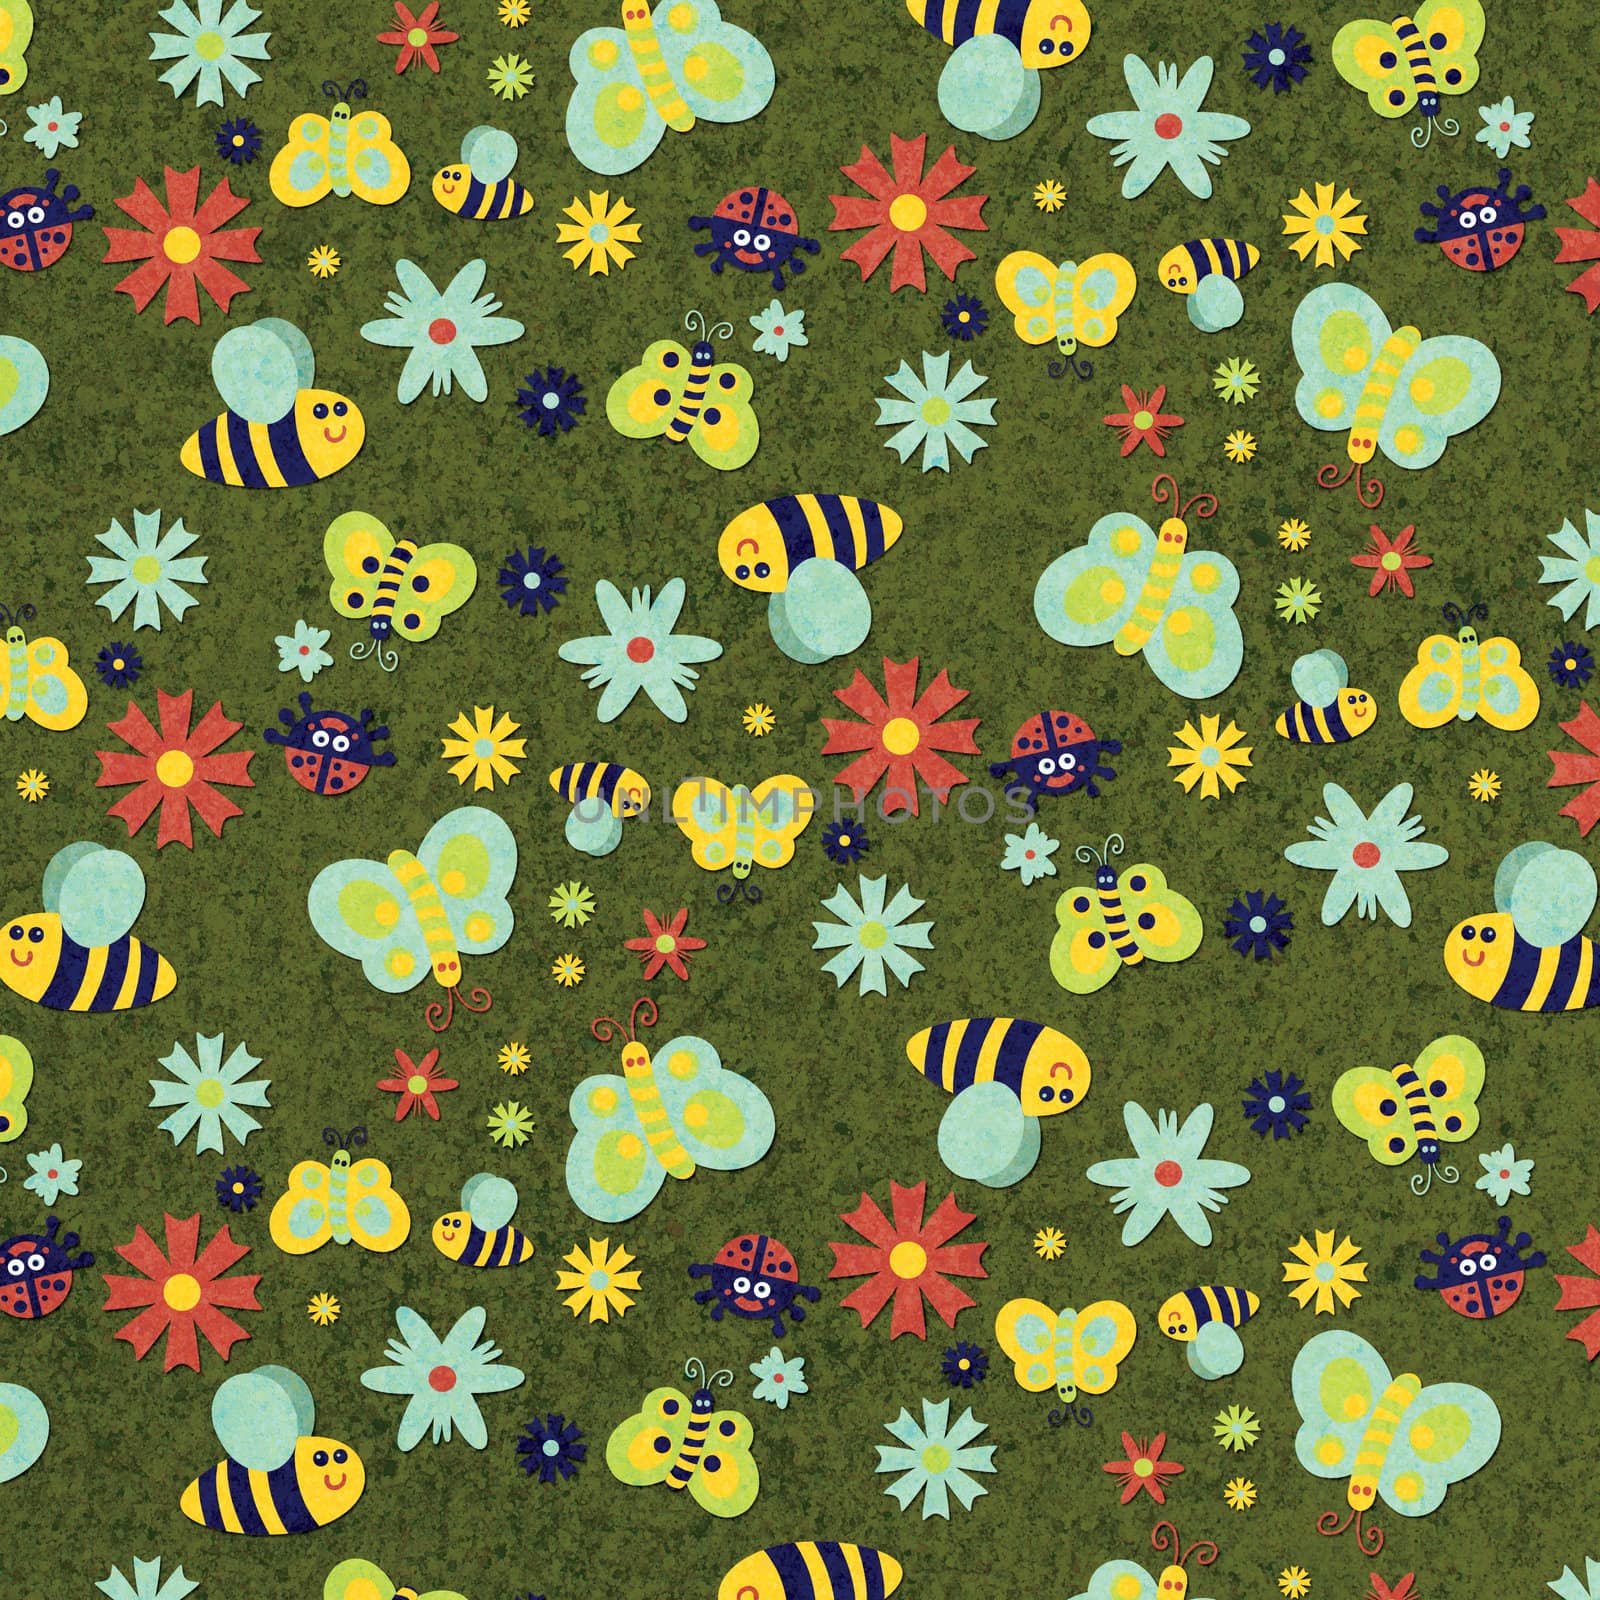 Summer themed pattern with butterflies, bees, and flowers with green textured background